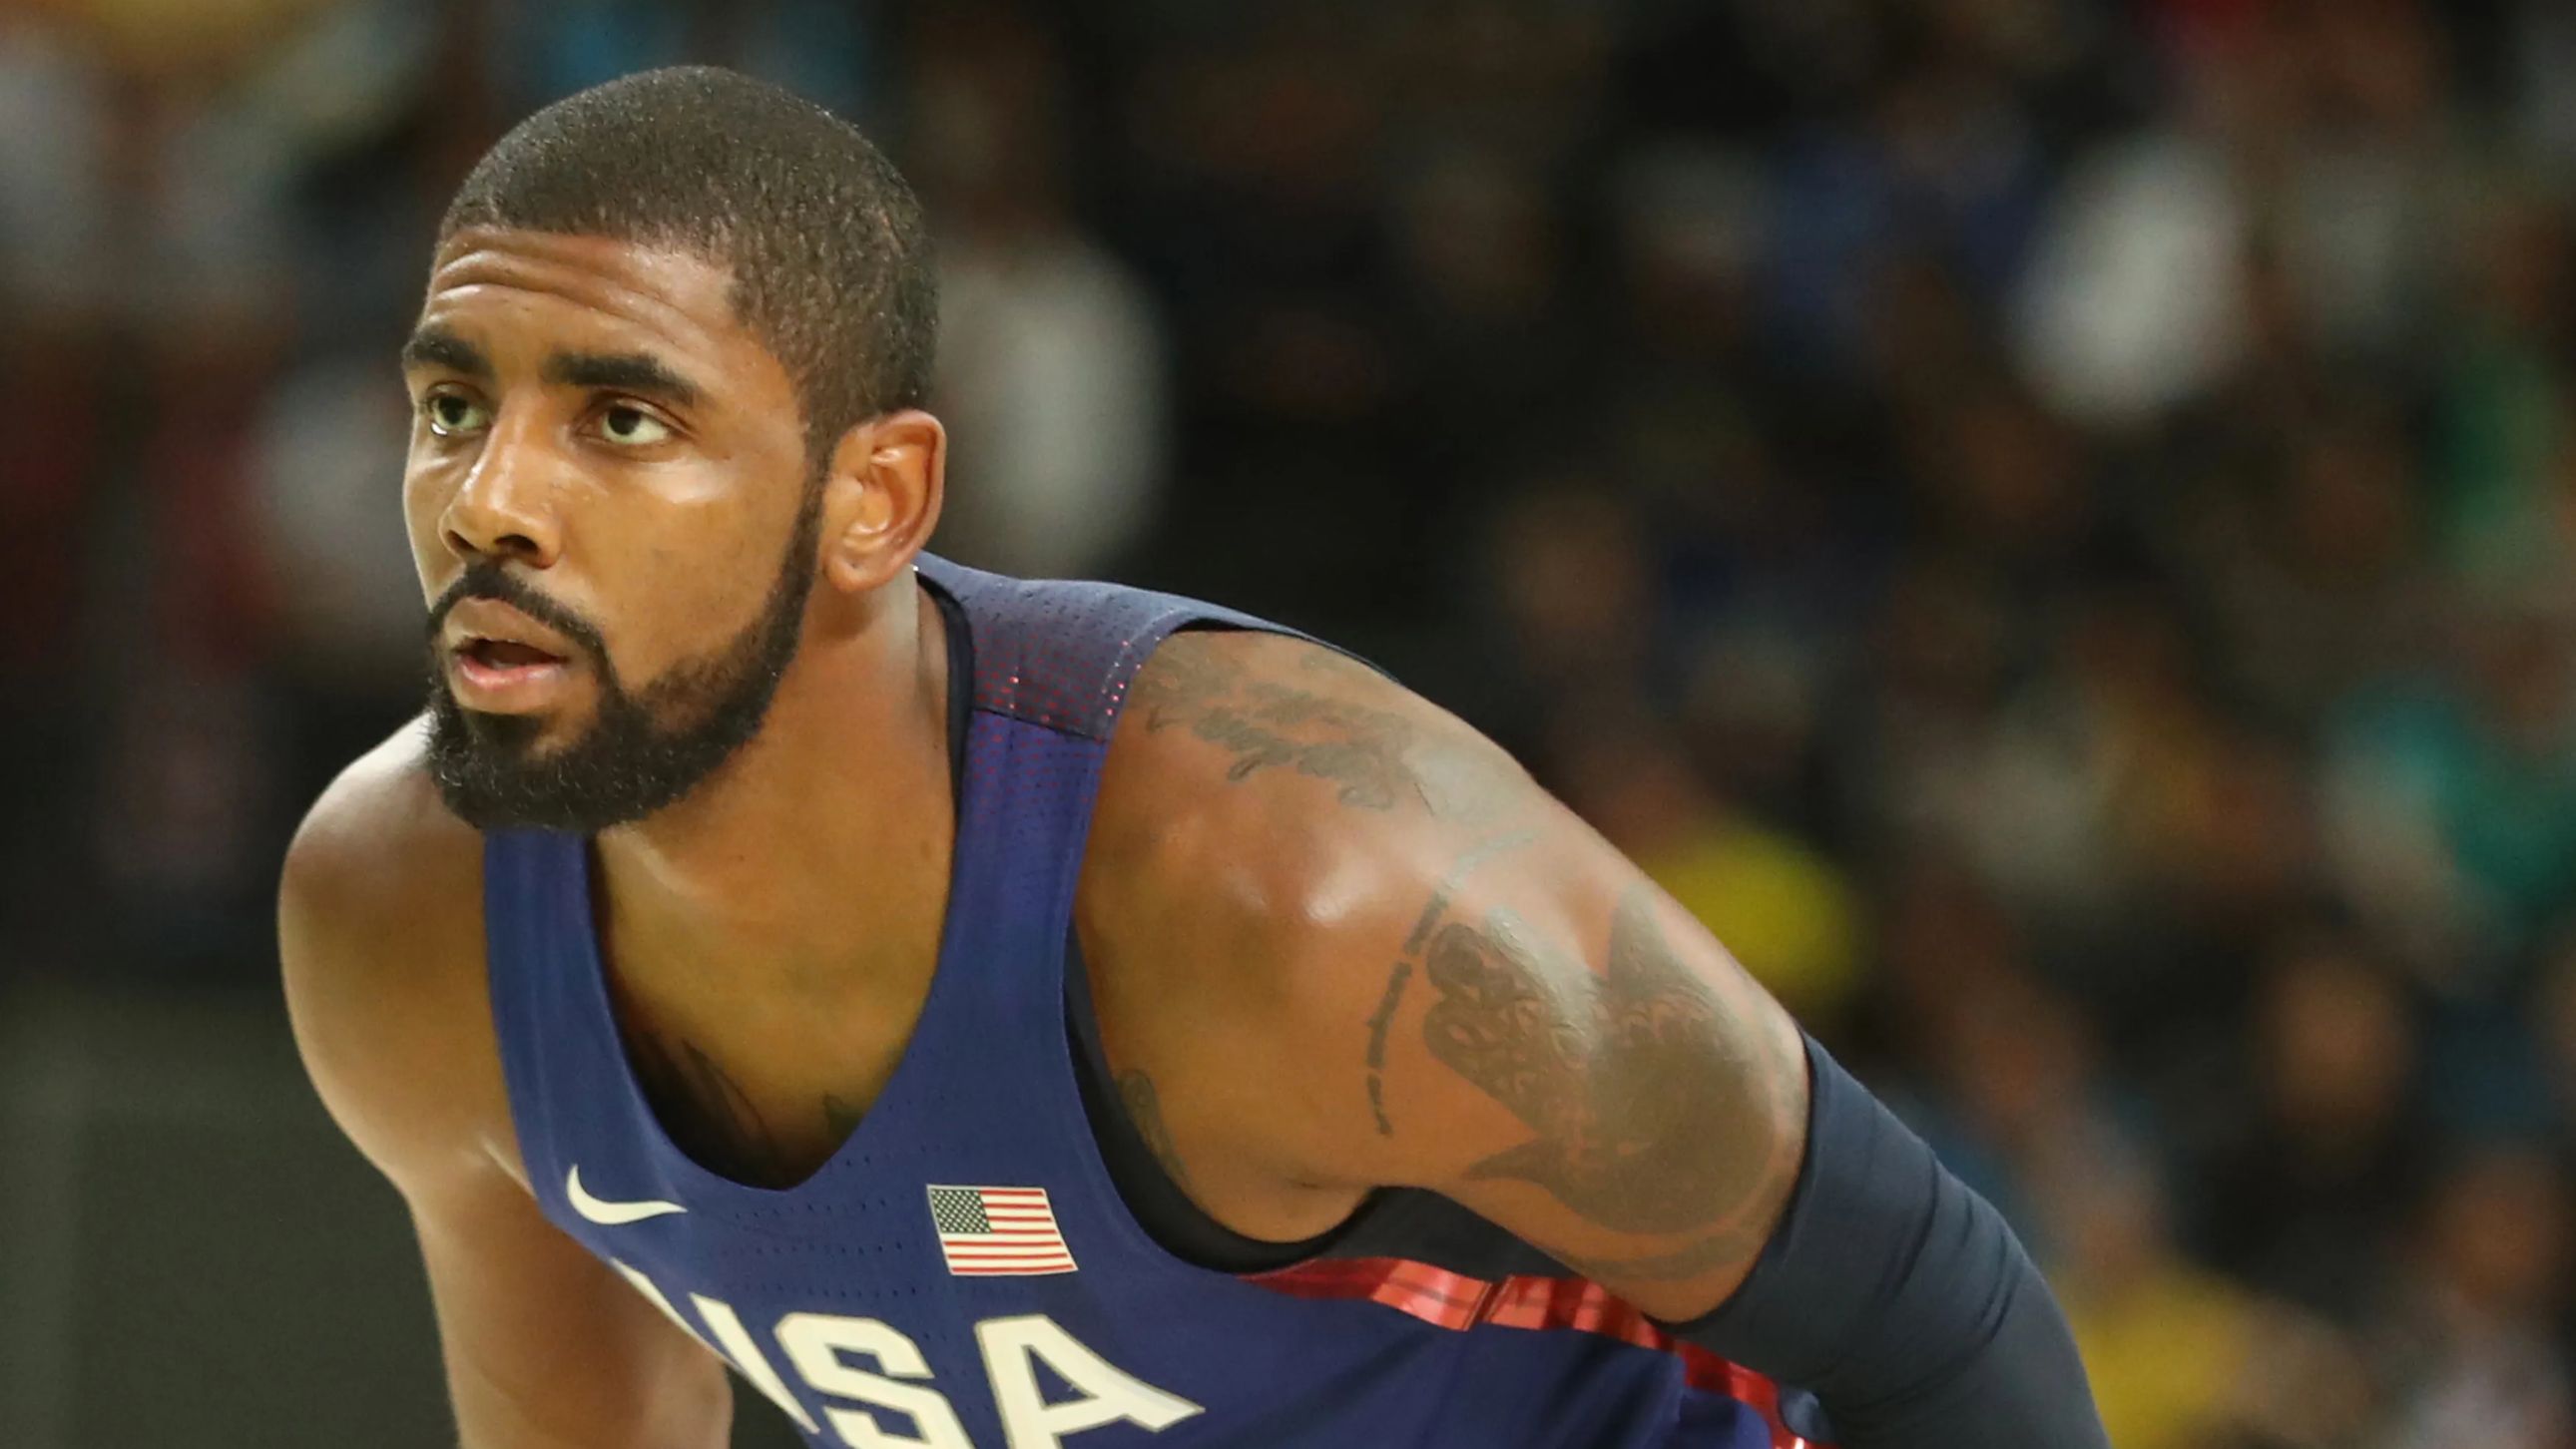 Kyrie Irving playing for the national team